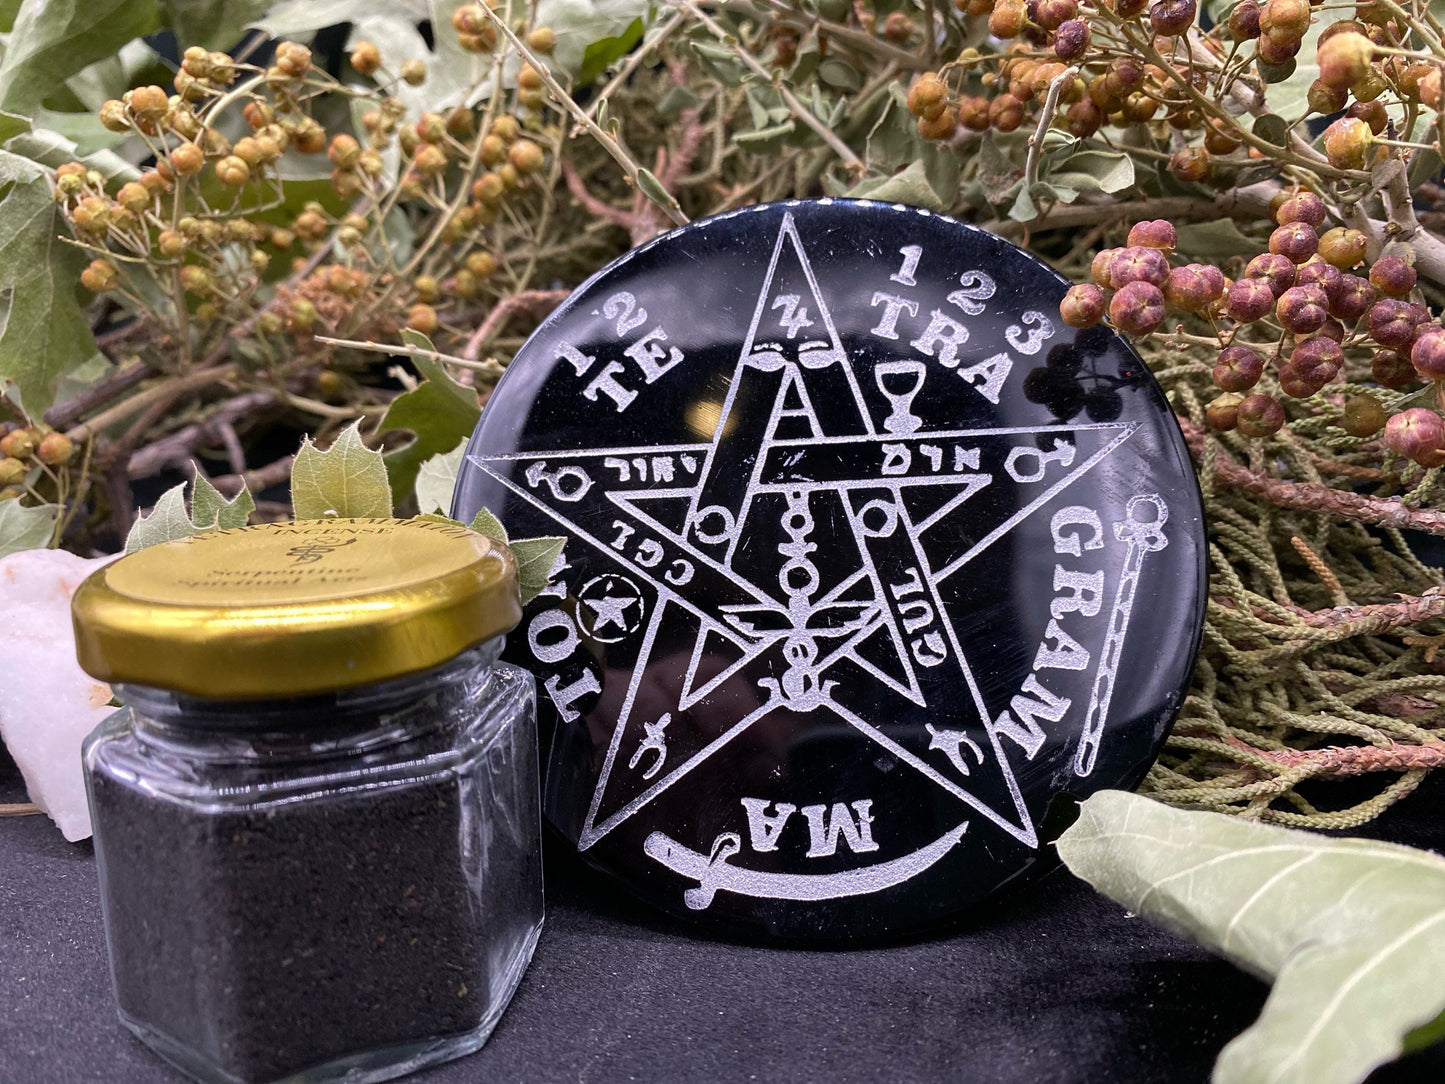 Tetragrammaton Incense (Aleister Crowley Recipe) + Our Favorite Incense + Ritually Charged + Ceremonial Magick + Sorcery + Necromancy